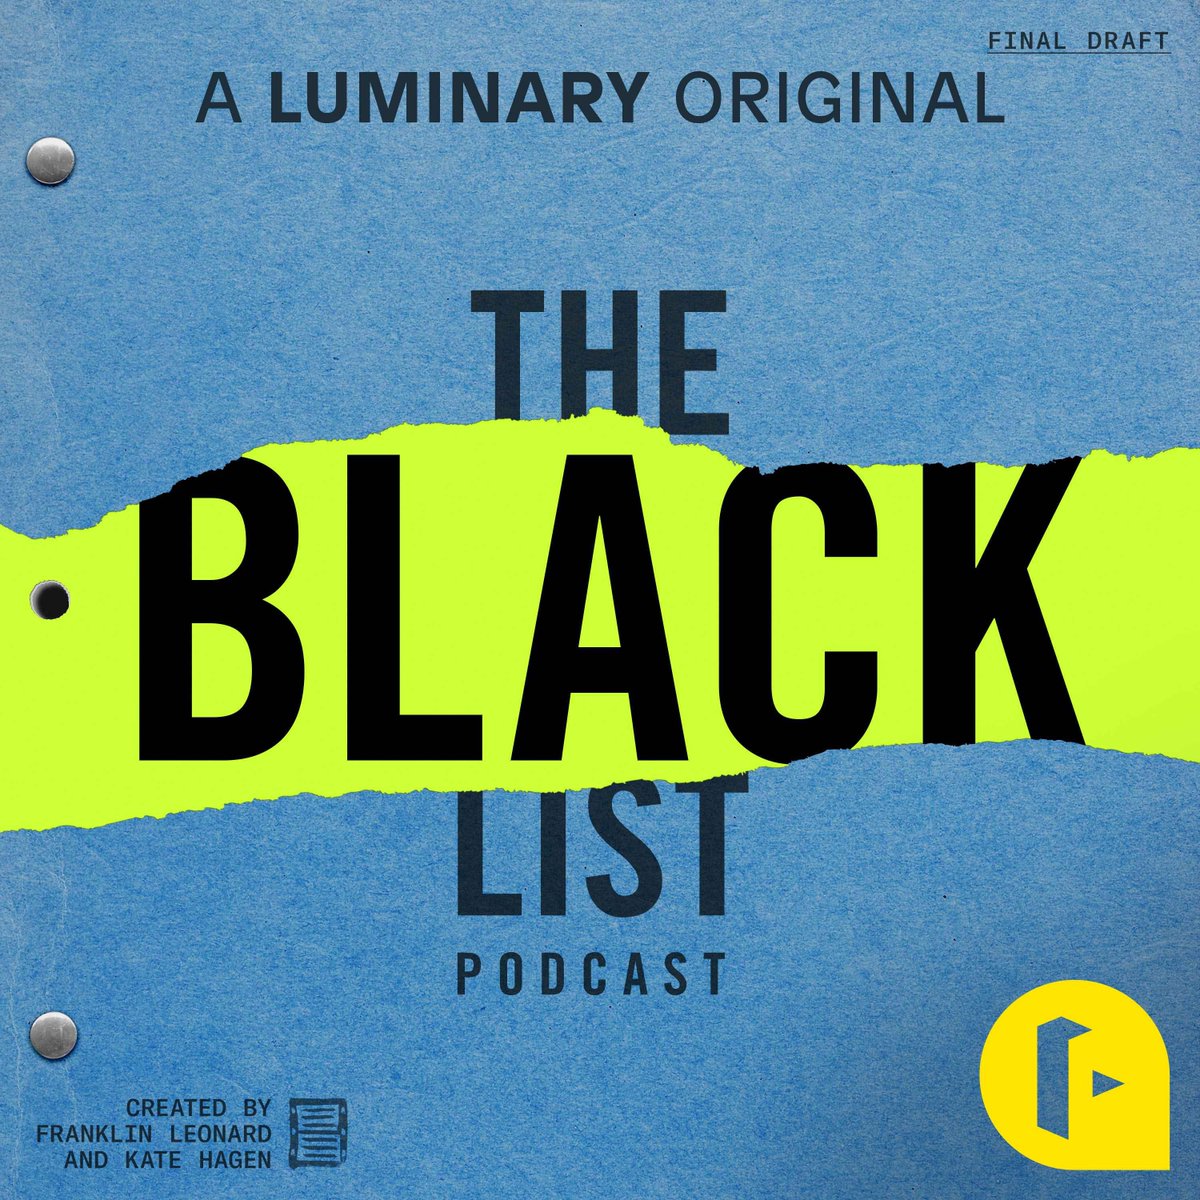 PSST! Did you know you can now listen to ALL episodes of The Black List Podcast from @hearluminary for FREE?! Head on over to blcklst.com/earmovies-arch… to start listening to conversations with guests like Spike Lee, @rgay + @Sethrogen today! As always, happy listening! 🎧